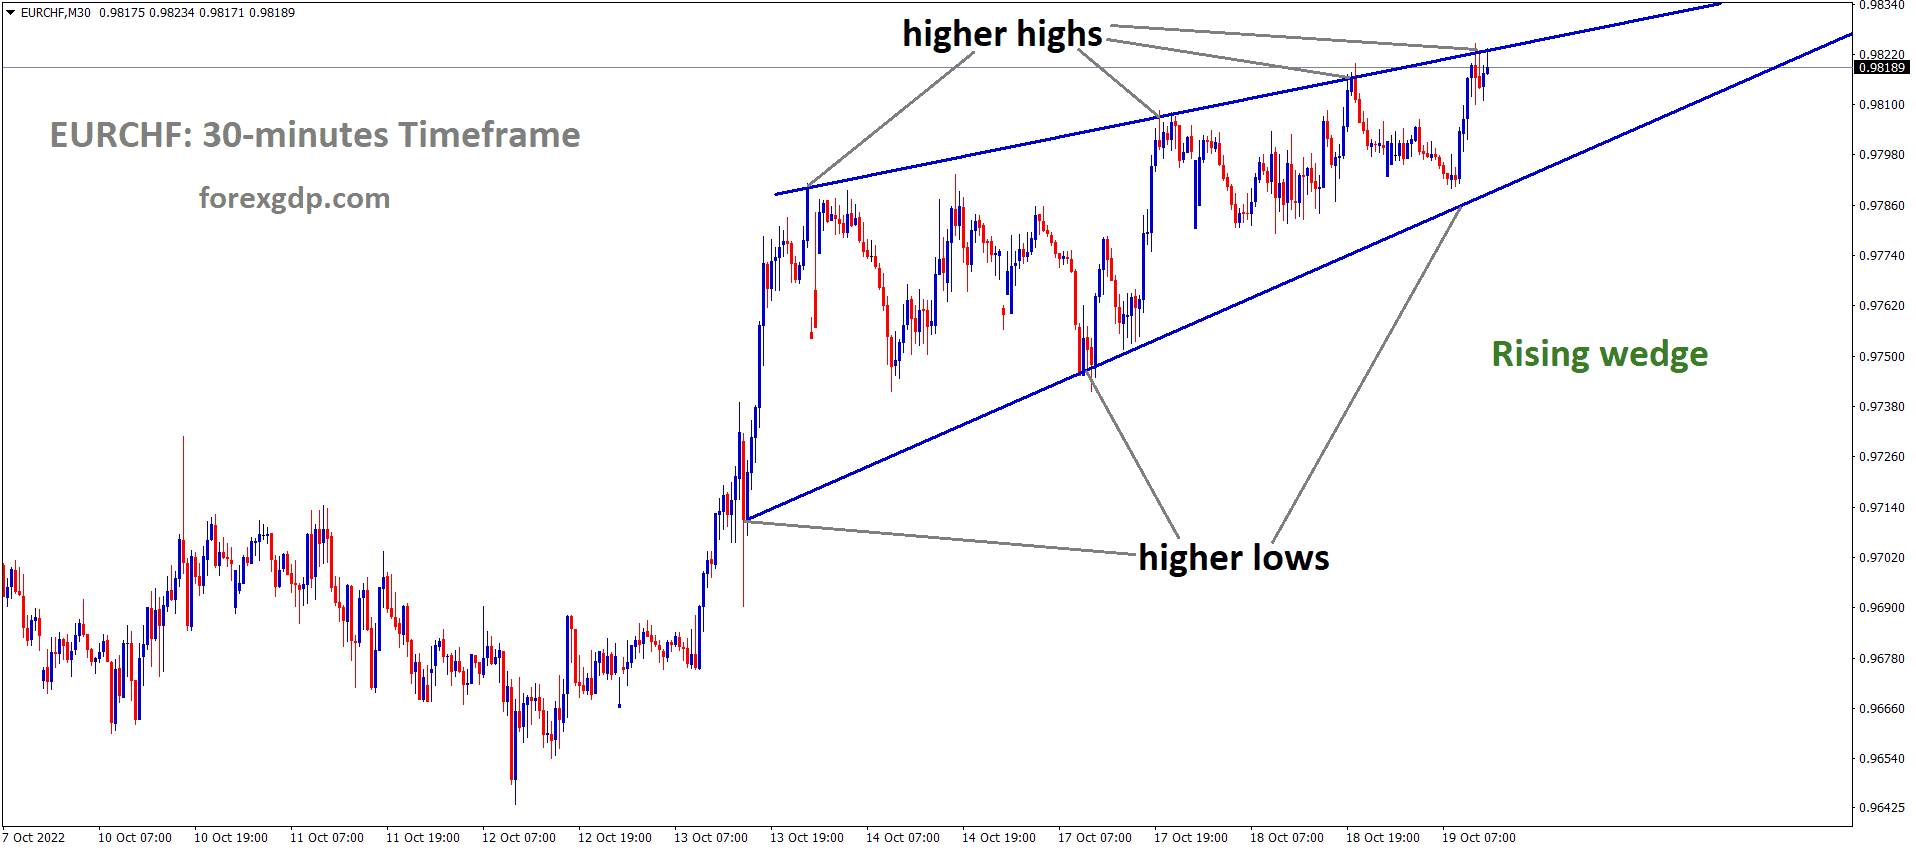 EURCHF is moving in the Rising wedge Pattern and the market has reached the higher high area of the pattern